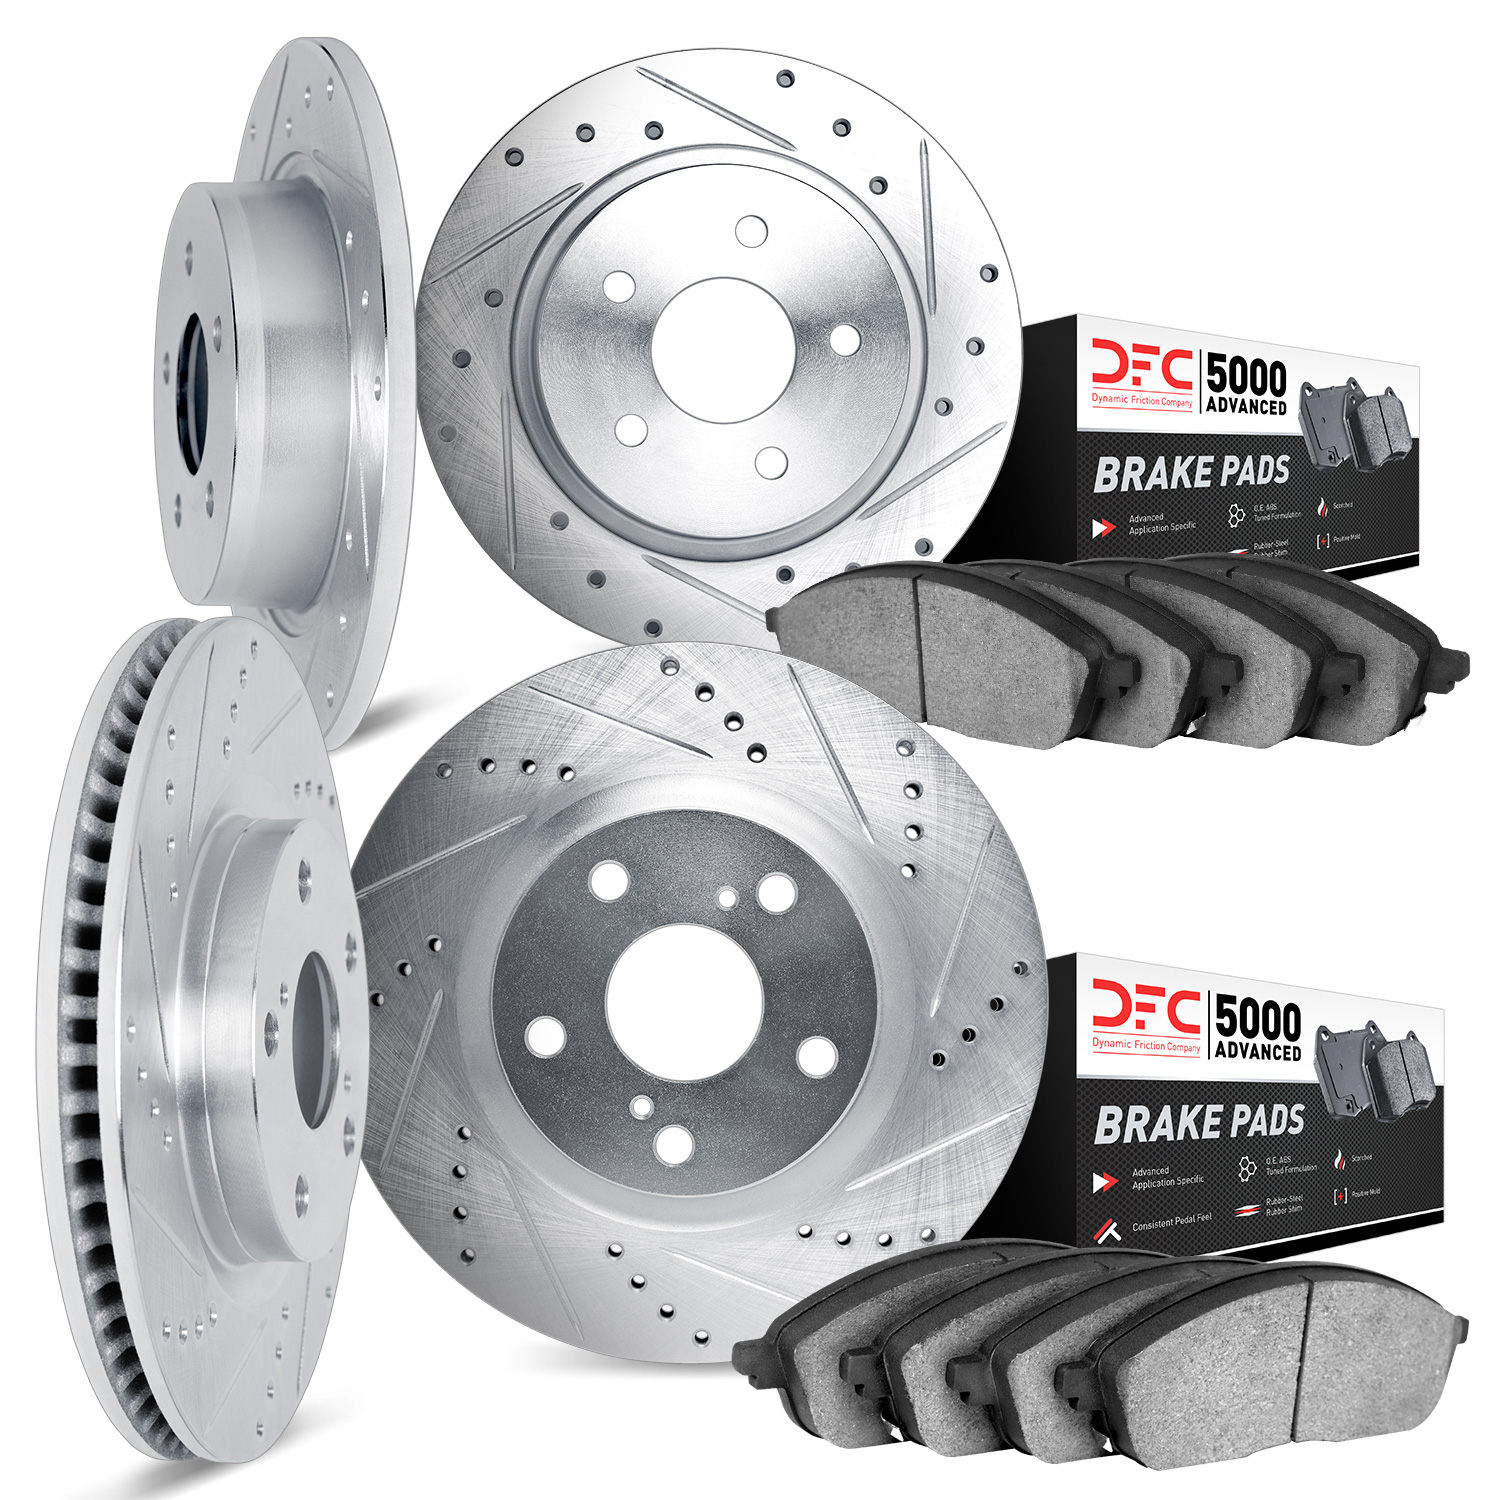 7504-27007 Drilled/Slotted Brake Rotors w/5000 Advanced Brake Pads Kit [Silver], 2004-2013 Volvo, Position: Front and Rear